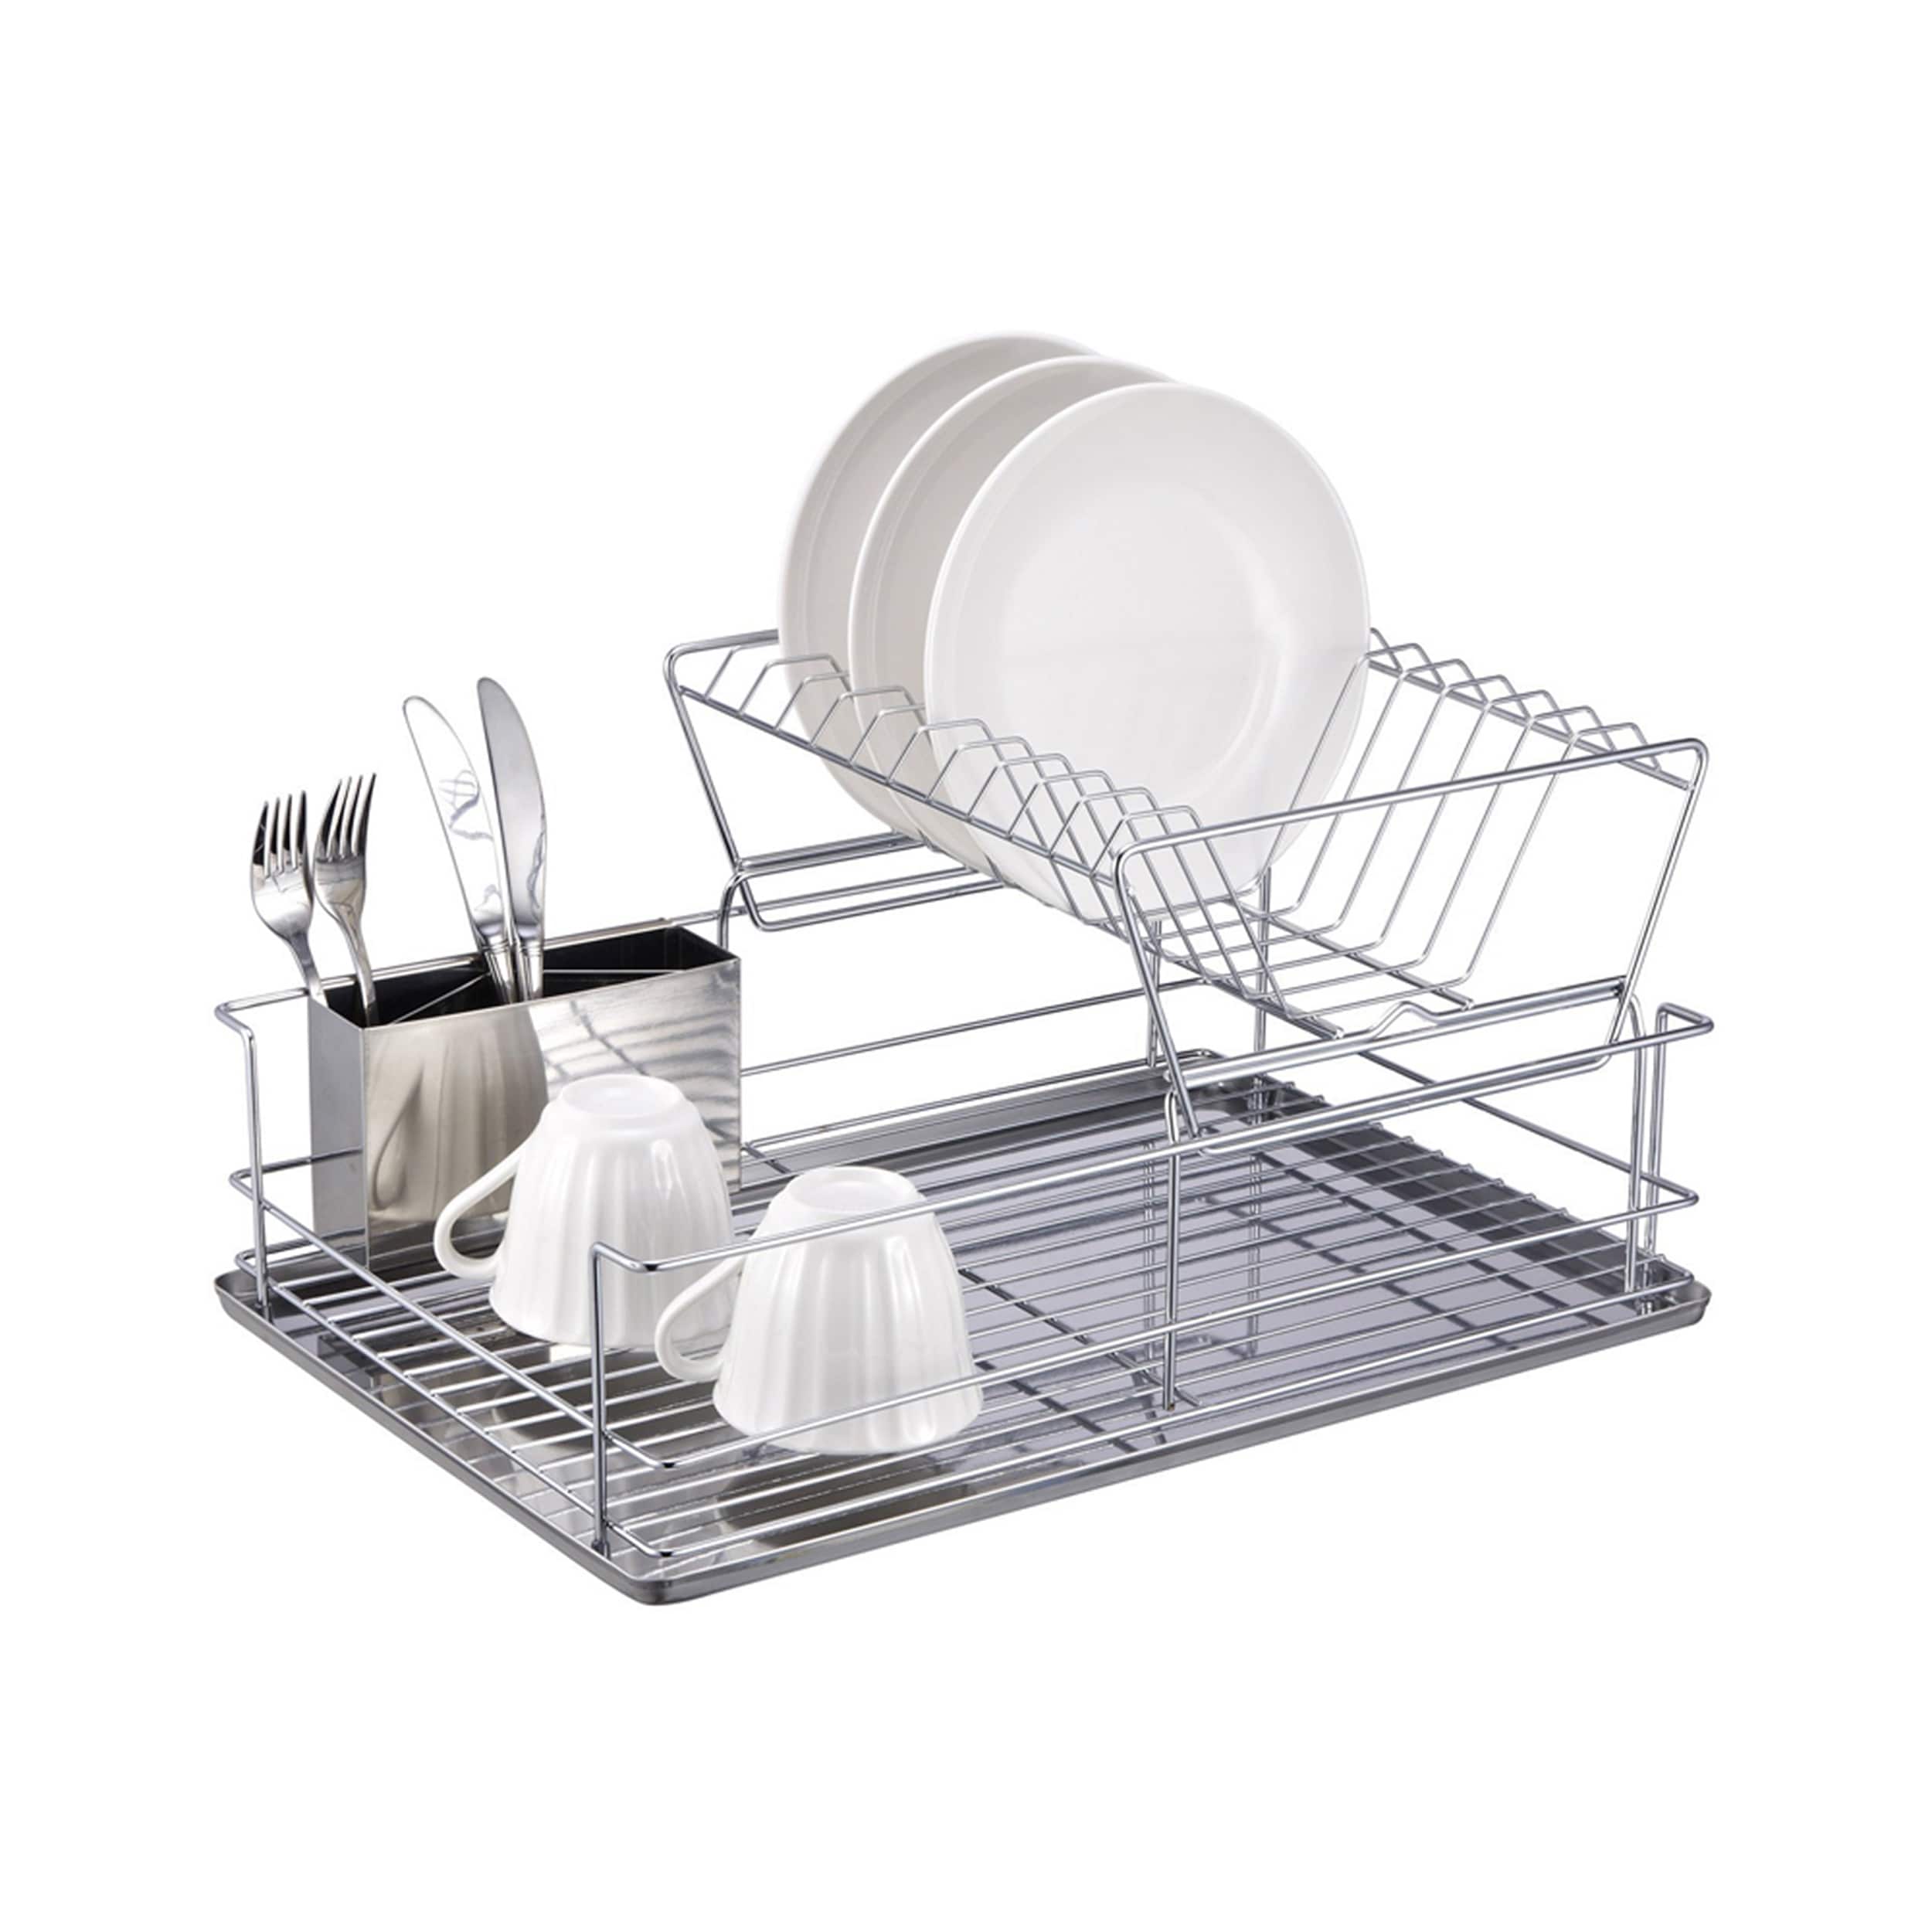 https://ak1.ostkcdn.com/images/products/is/images/direct/97f8ecee6e9479df80649eb8e721ee5f3adfbcf0/Better-Chef-22-Inch-Dish-Rack.jpg